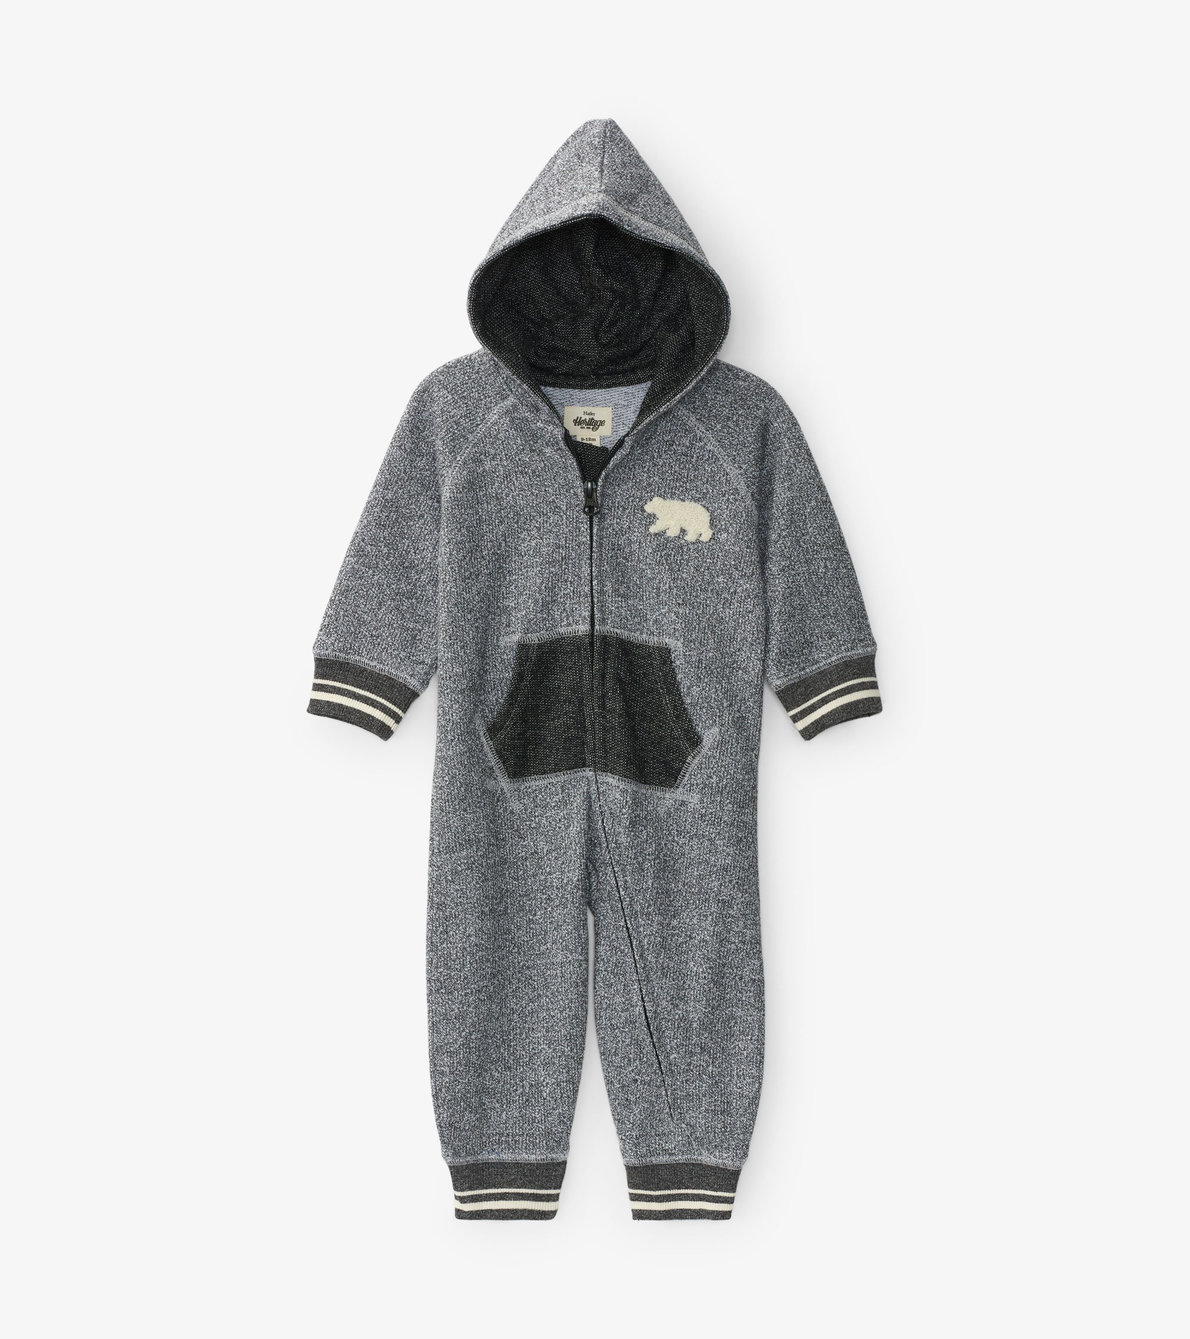 View larger image of Marled Grey Baby Heritage Full Zip Romper